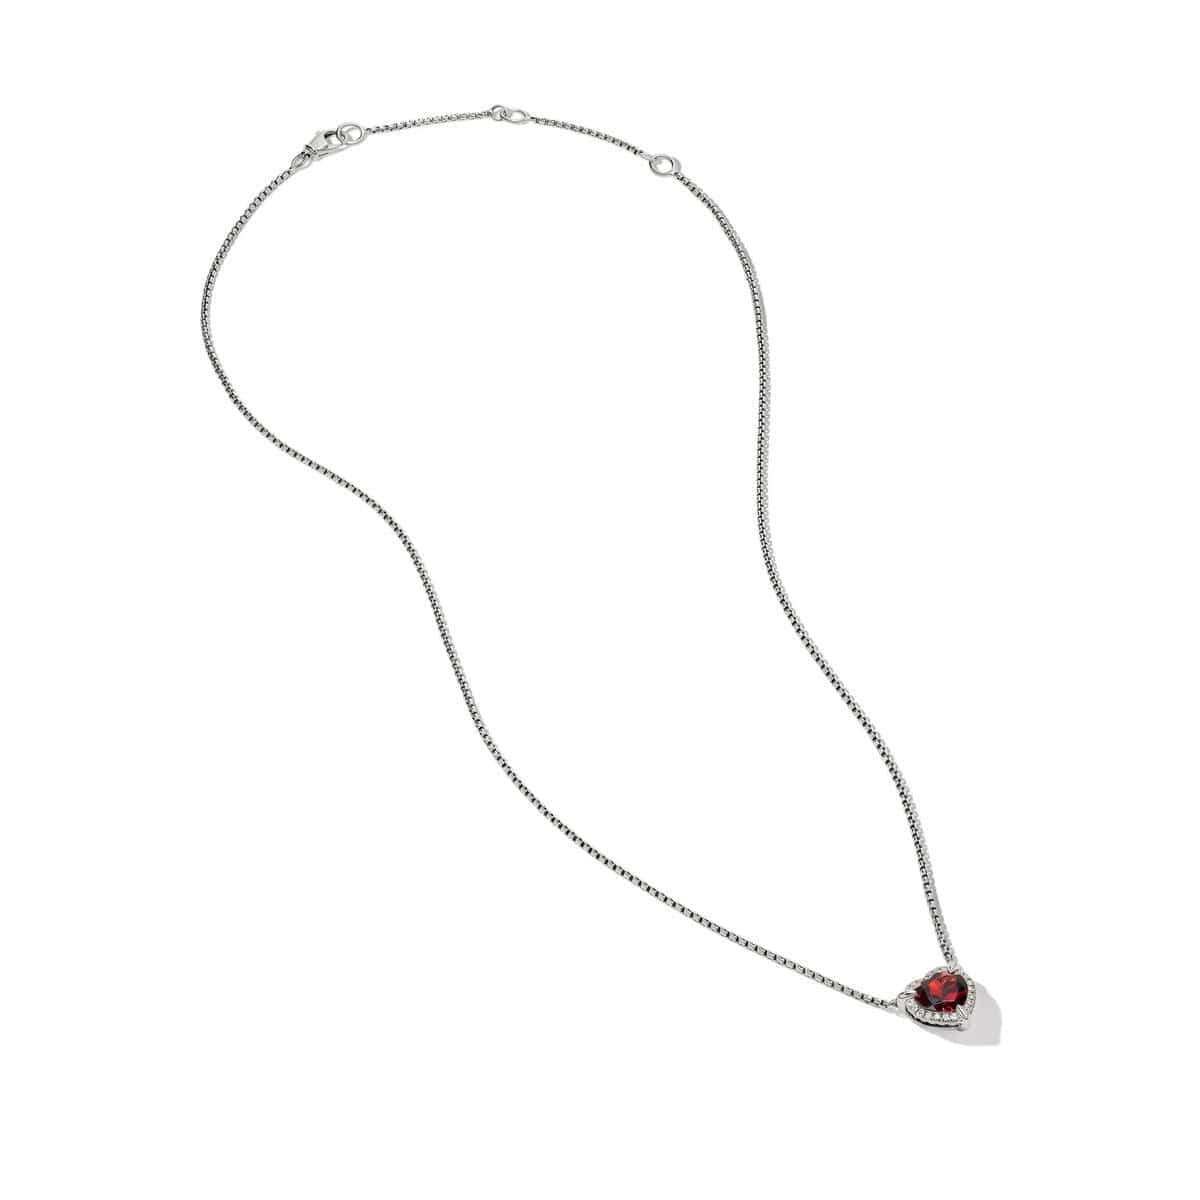 Chatelaine® Heart Pendant Necklace in Sterling Silver with Garnet and Pavé Diamonds